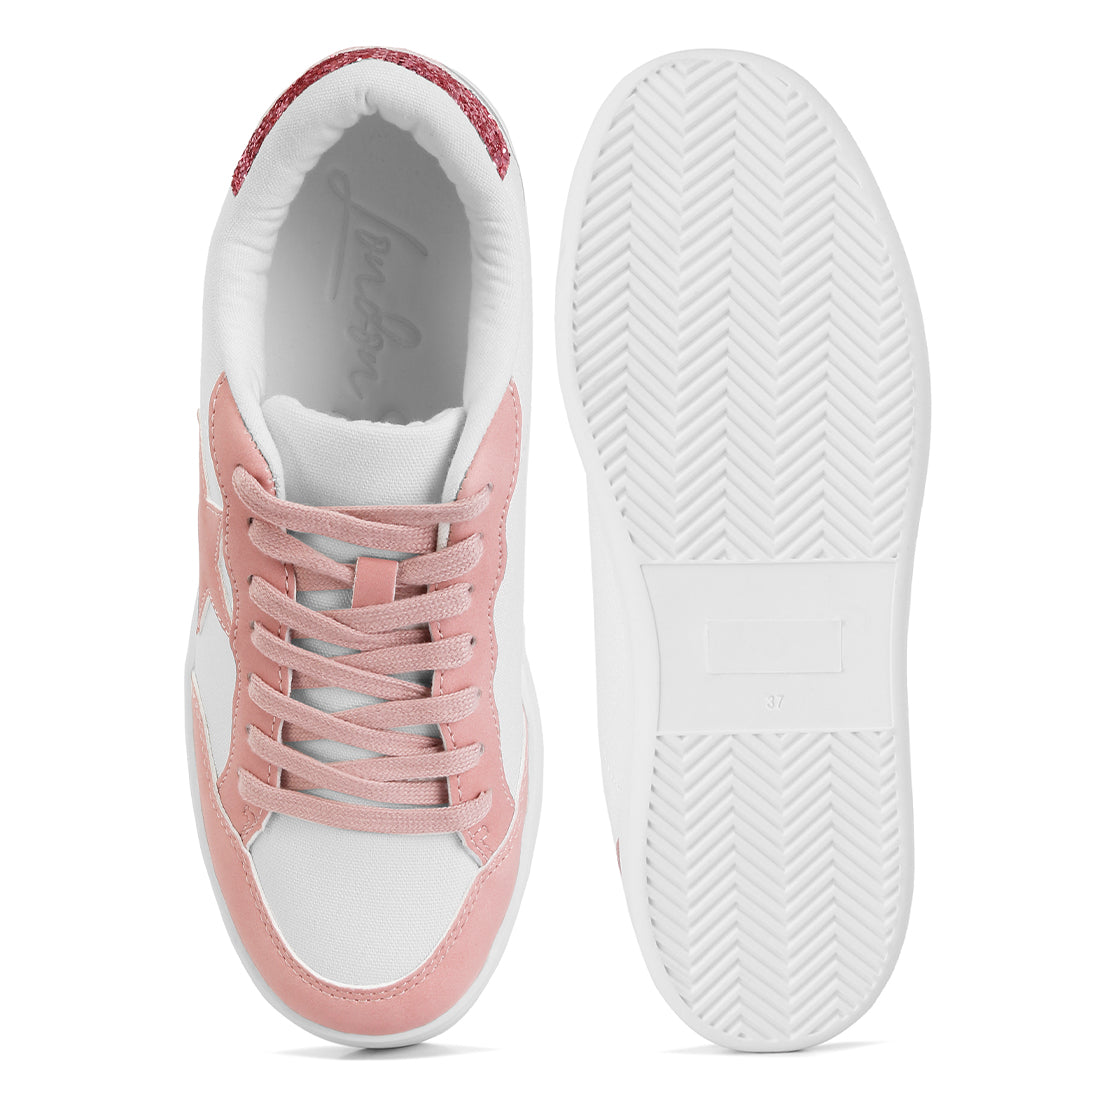 glitter detail star sneakers#color_pink